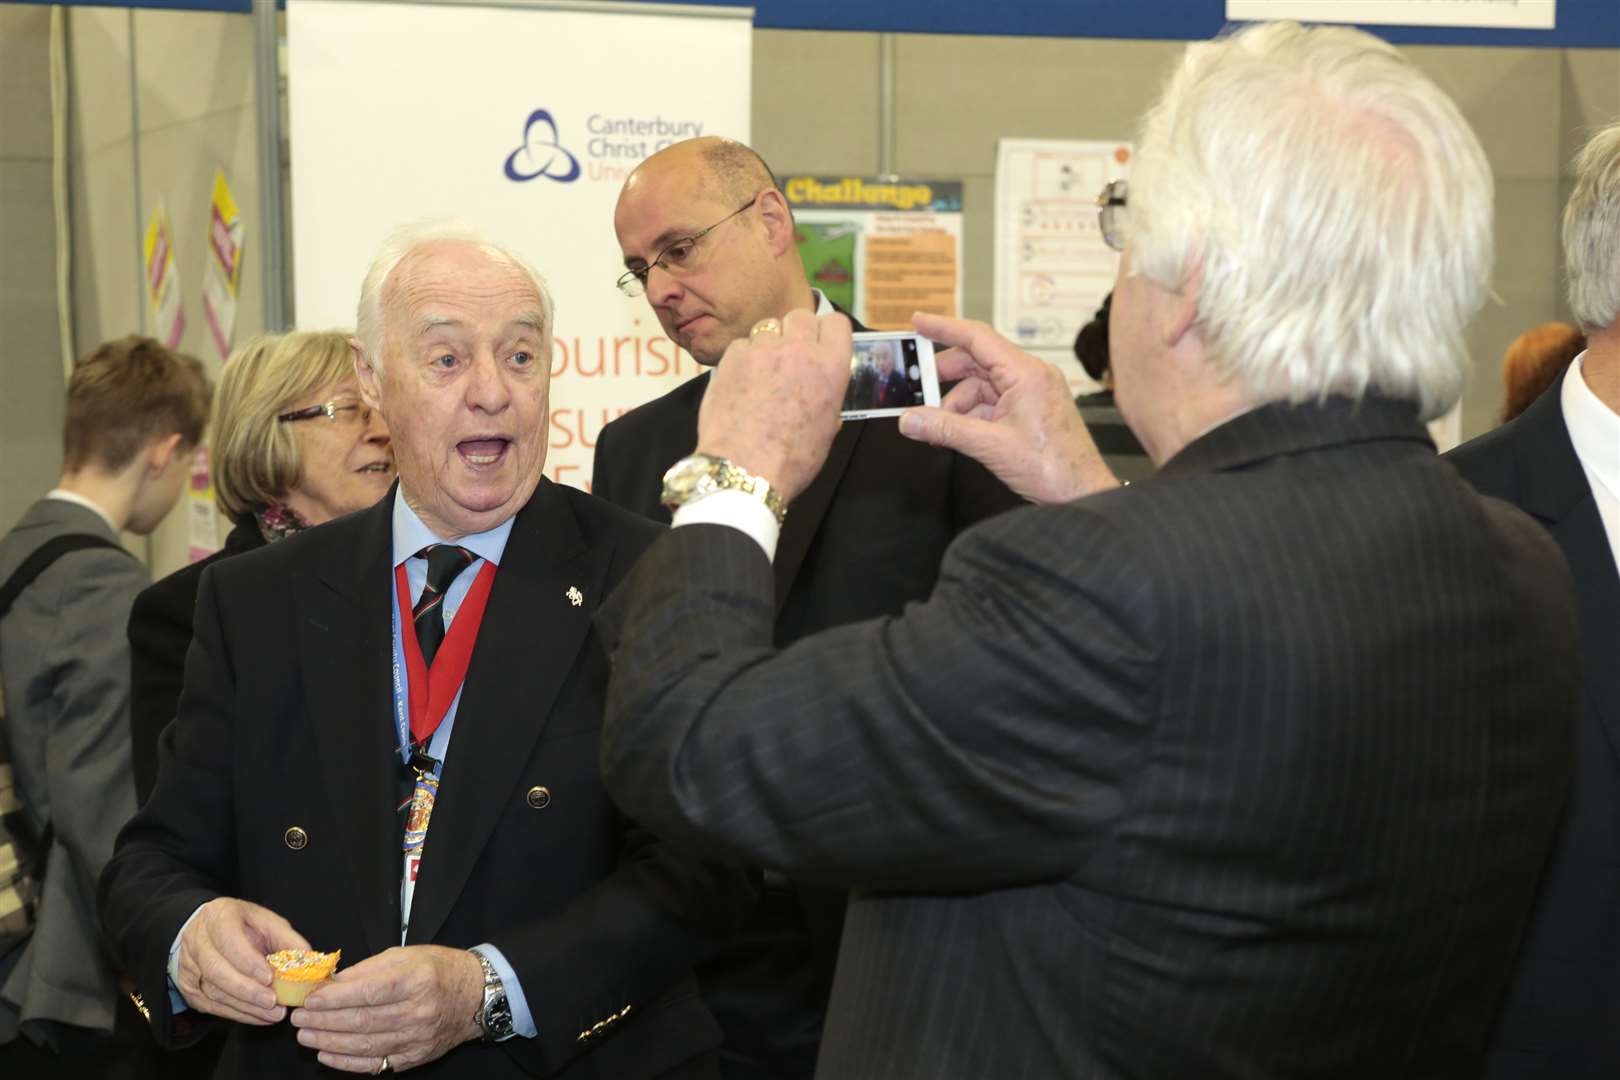 KCC chairman Cllr Peter Homewood takes a picture